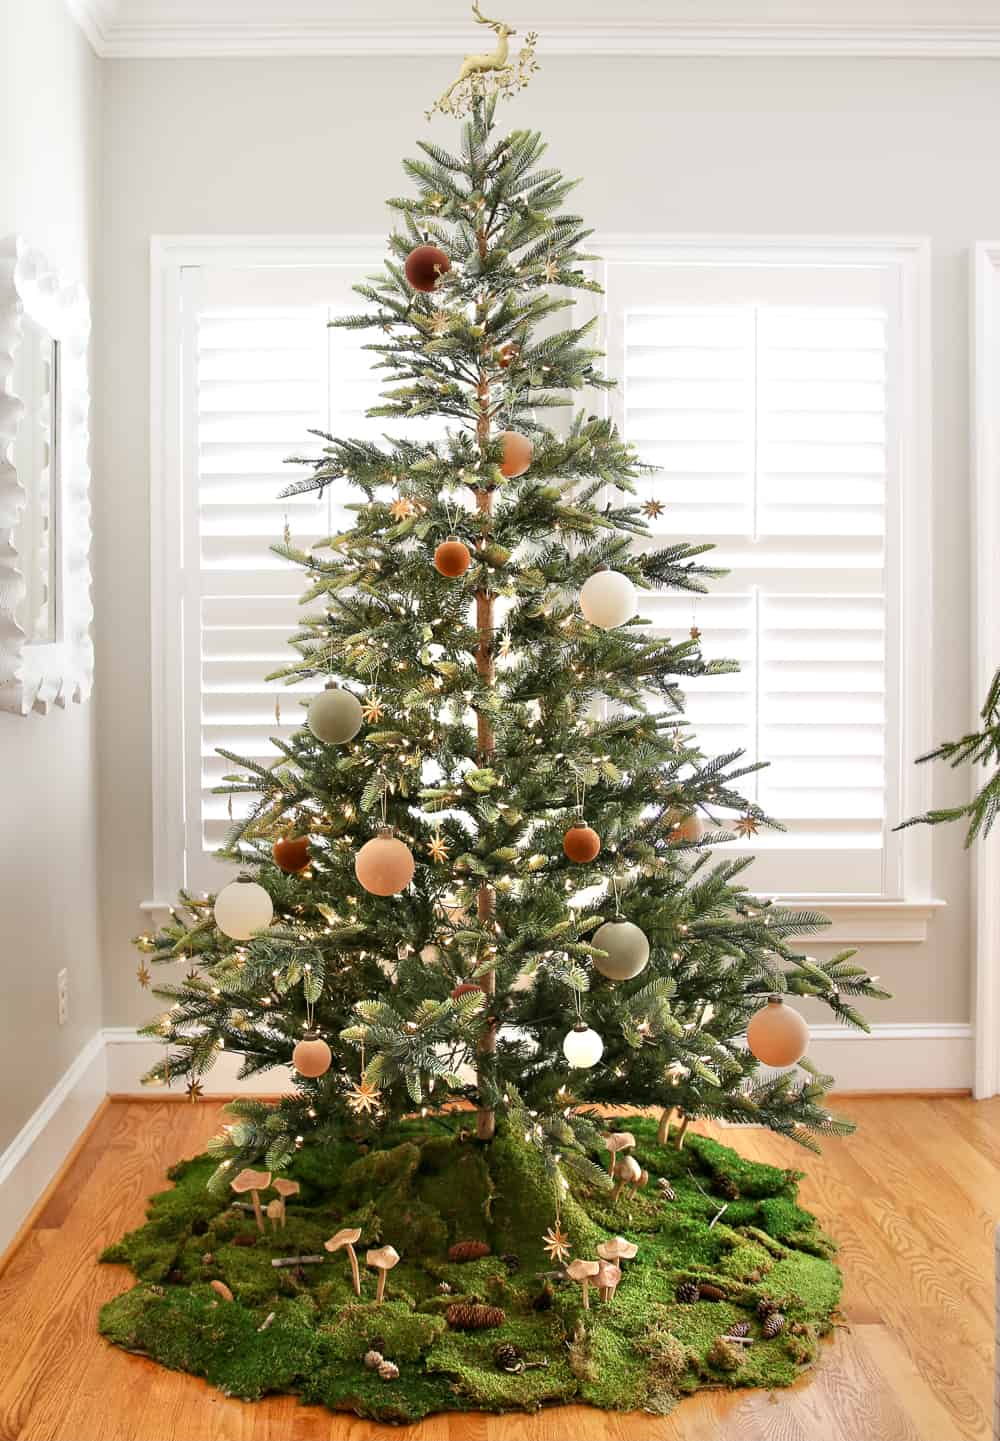 Sparse fir Christmas tree with velvet ornaments, living room with agreeable gray walls, interior window shutters, woodland theme tree skirt with moss, mushrooms, pinecones